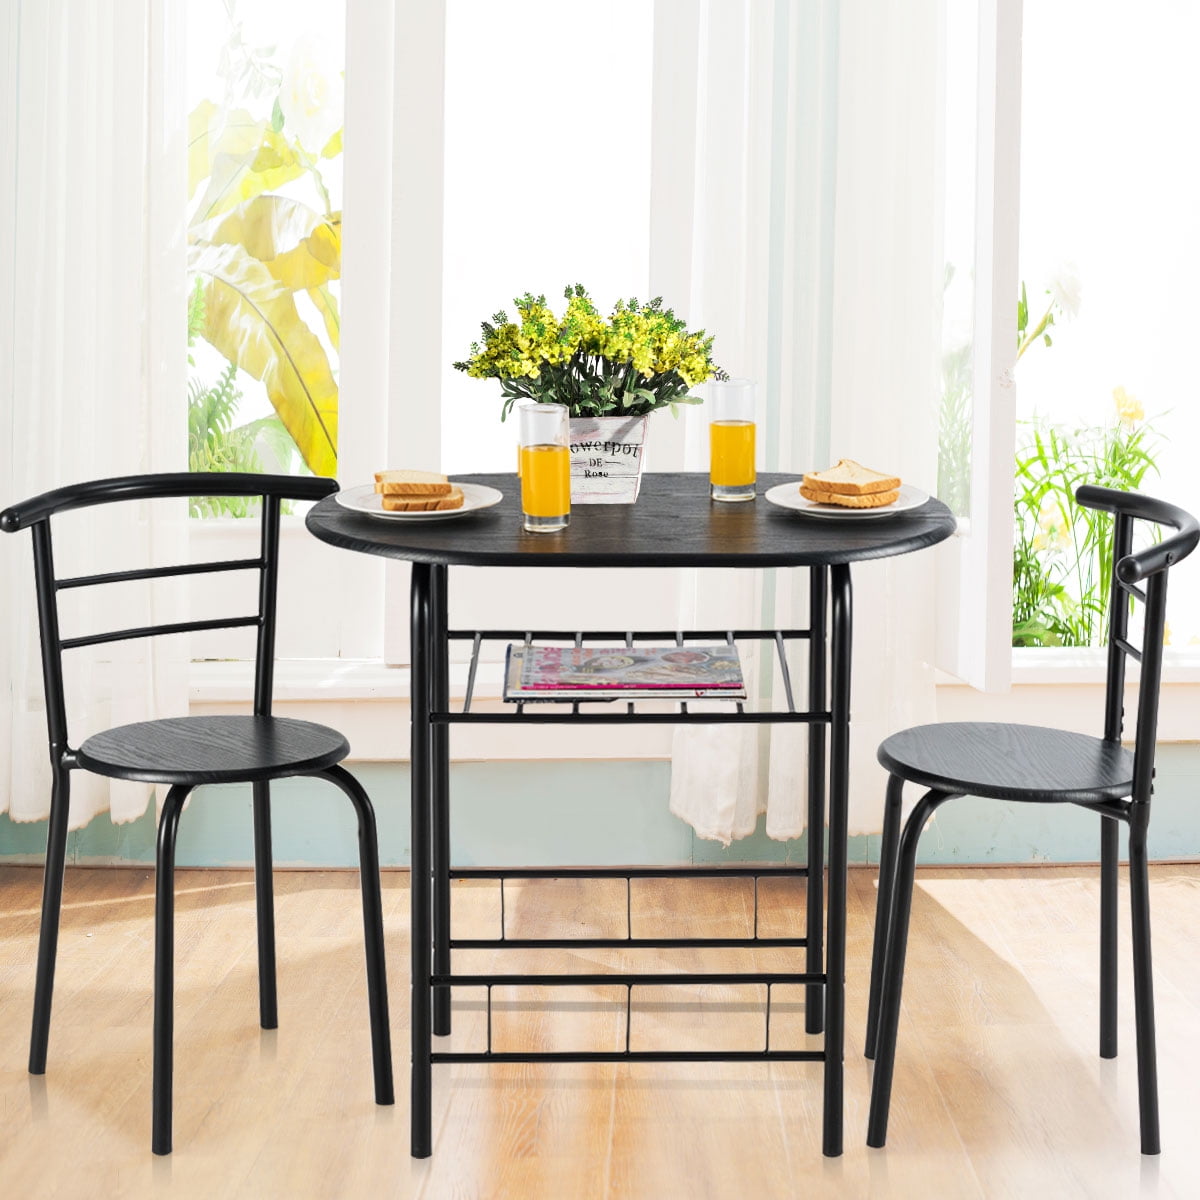 Details about   3pcs Set Dinner Table Desk& 2 PVC Chairs Metal Home Kitchen Breakfast Furniture 